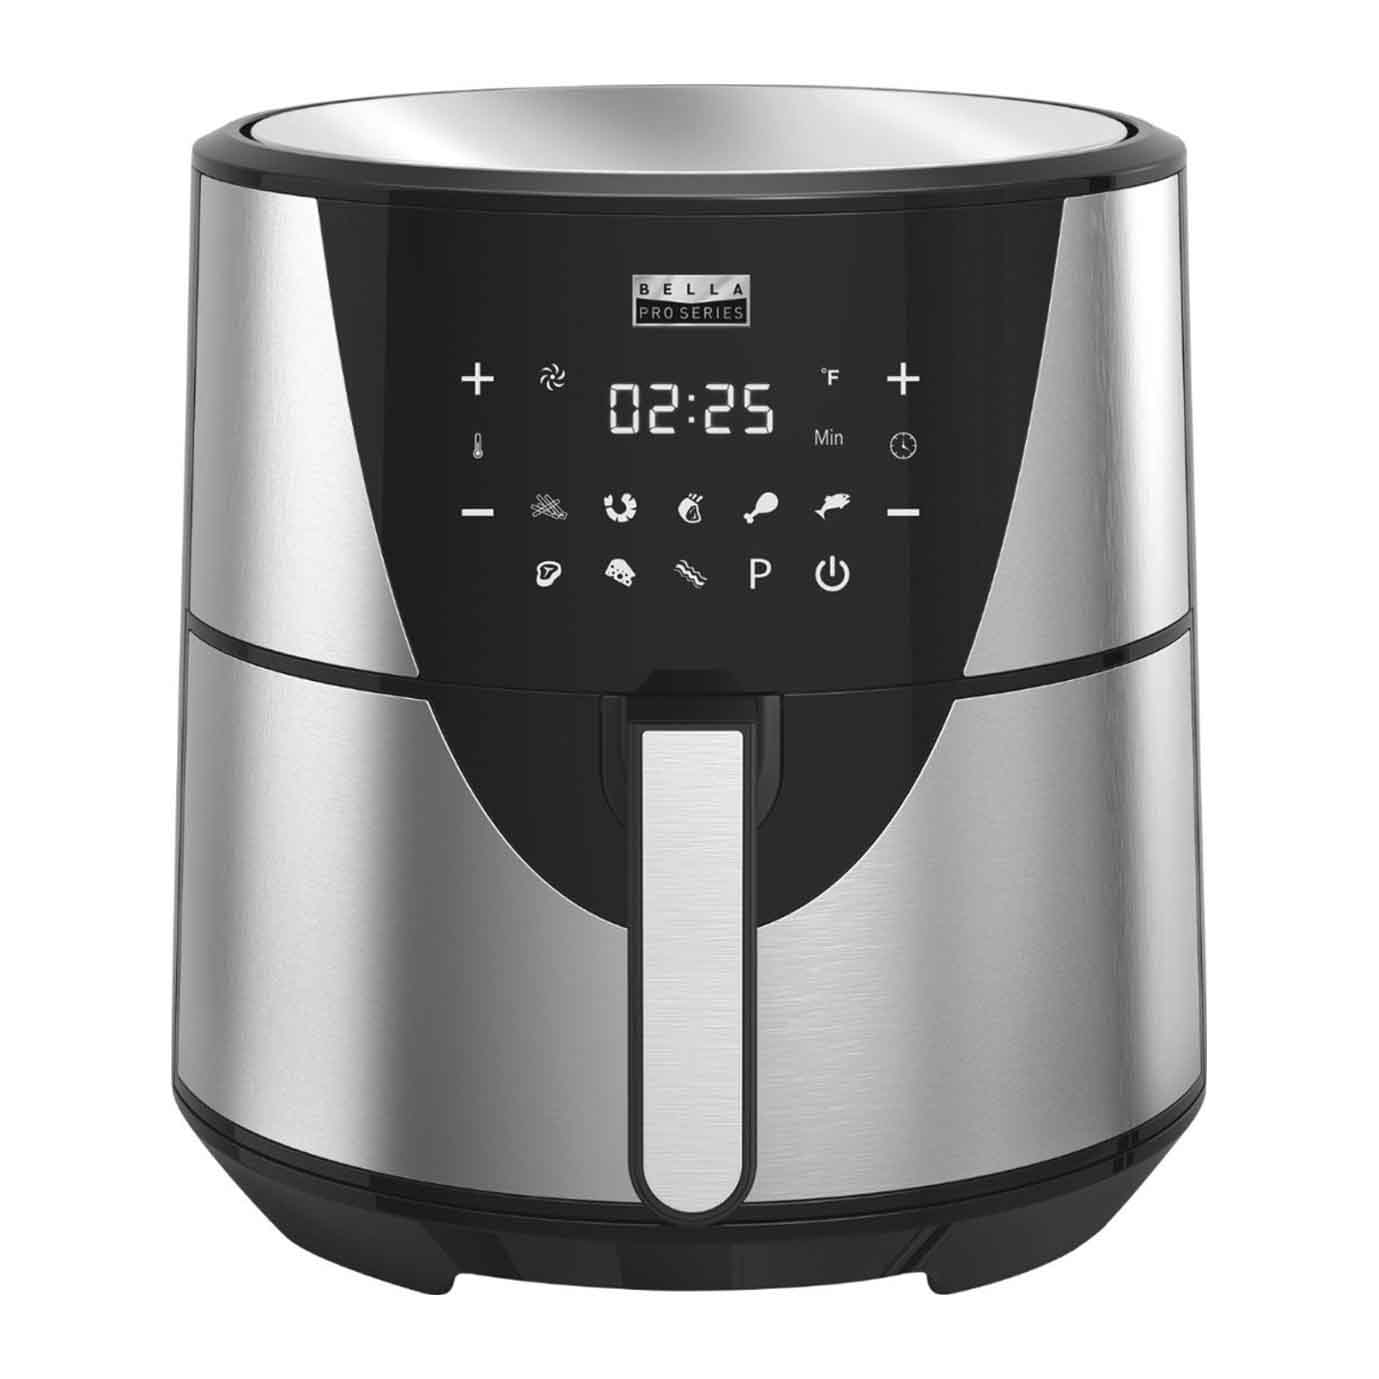 stainless steel Bella Pro Series 8-qt. Digital Air Fryer with removable basket